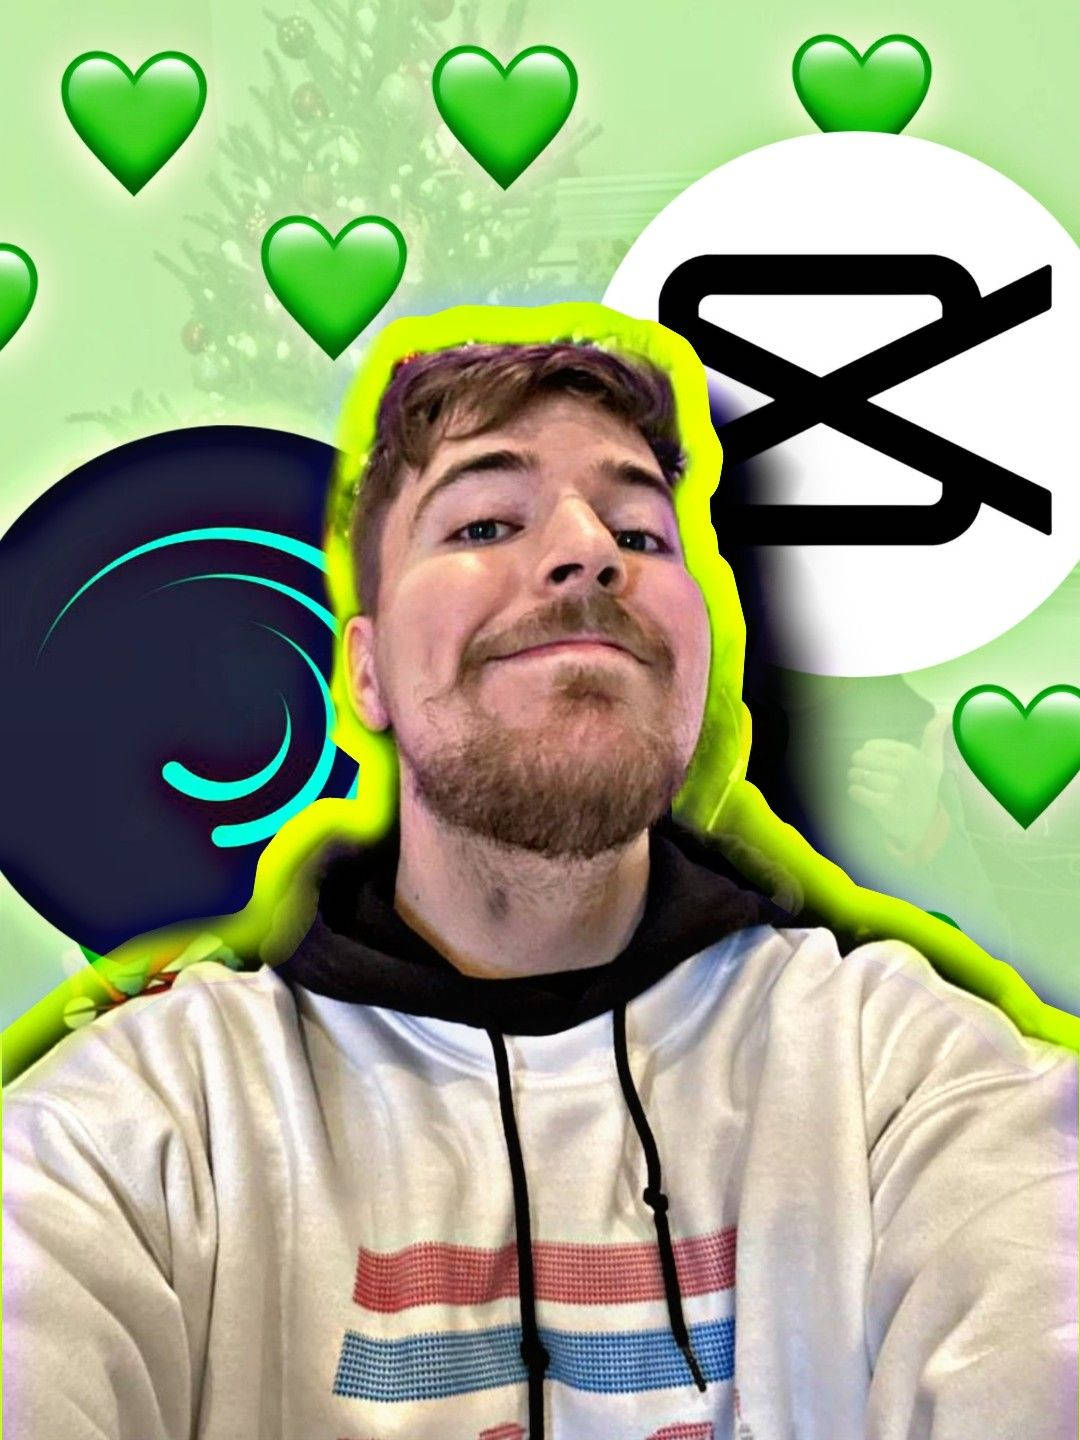 Mr Beast In Aesthetic Green Bacground Wallpaper